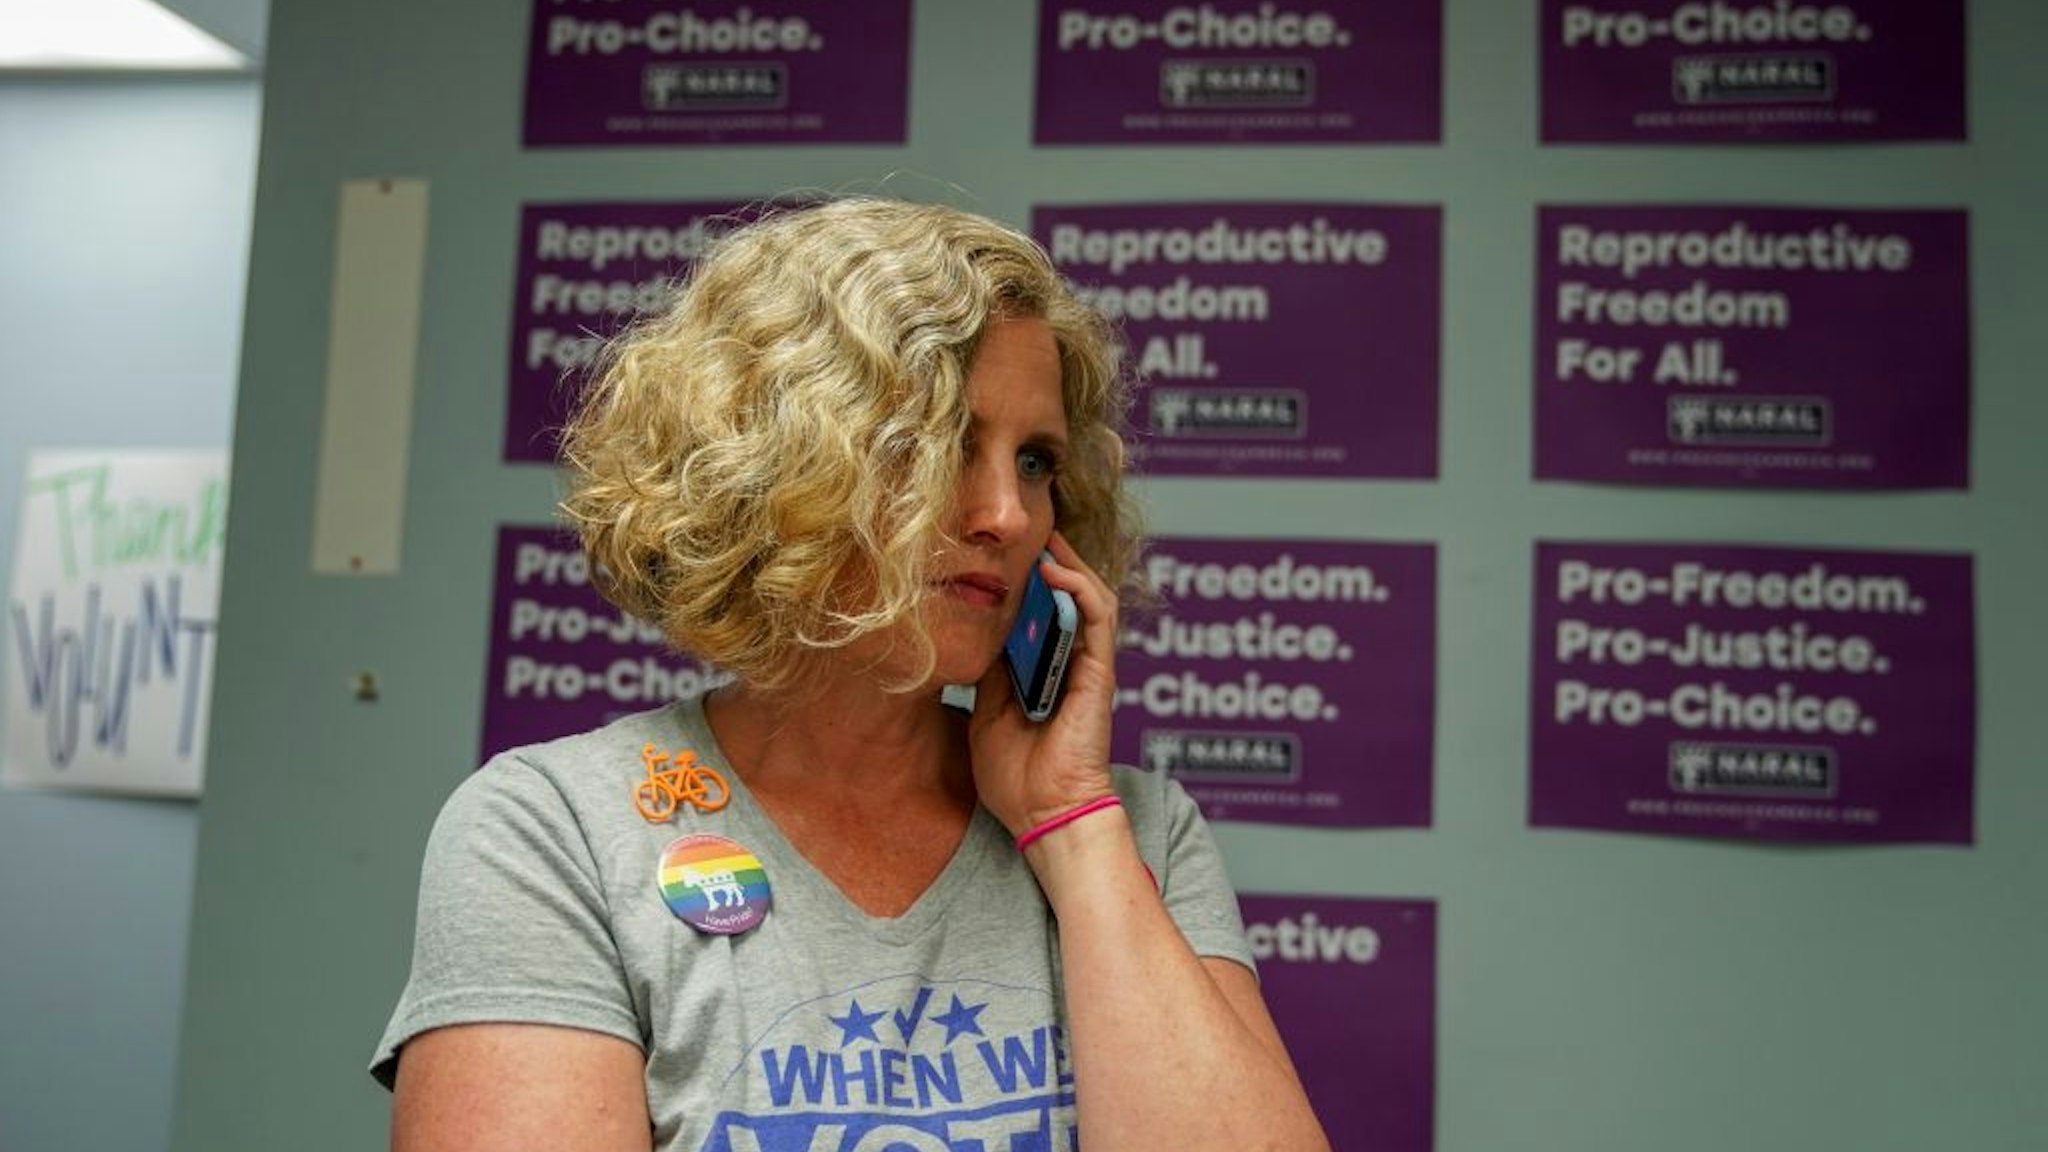 STERLING, VA - JULY 17: Juli Briskman, the Democratic nominee for Supervisor of Loudoun County's Algonkian District, takes a phone call in her campaign office as she prepares to door-to-door canvas in her neighborhood on Wednesday, July 17, 2019, in Sterling, VA. Briskman is the cyclist who was photographed flipping off Trump's presidential motorcade, only to be fired from her job. That got her angry, so she's running for Supervisor in her Virginia district.